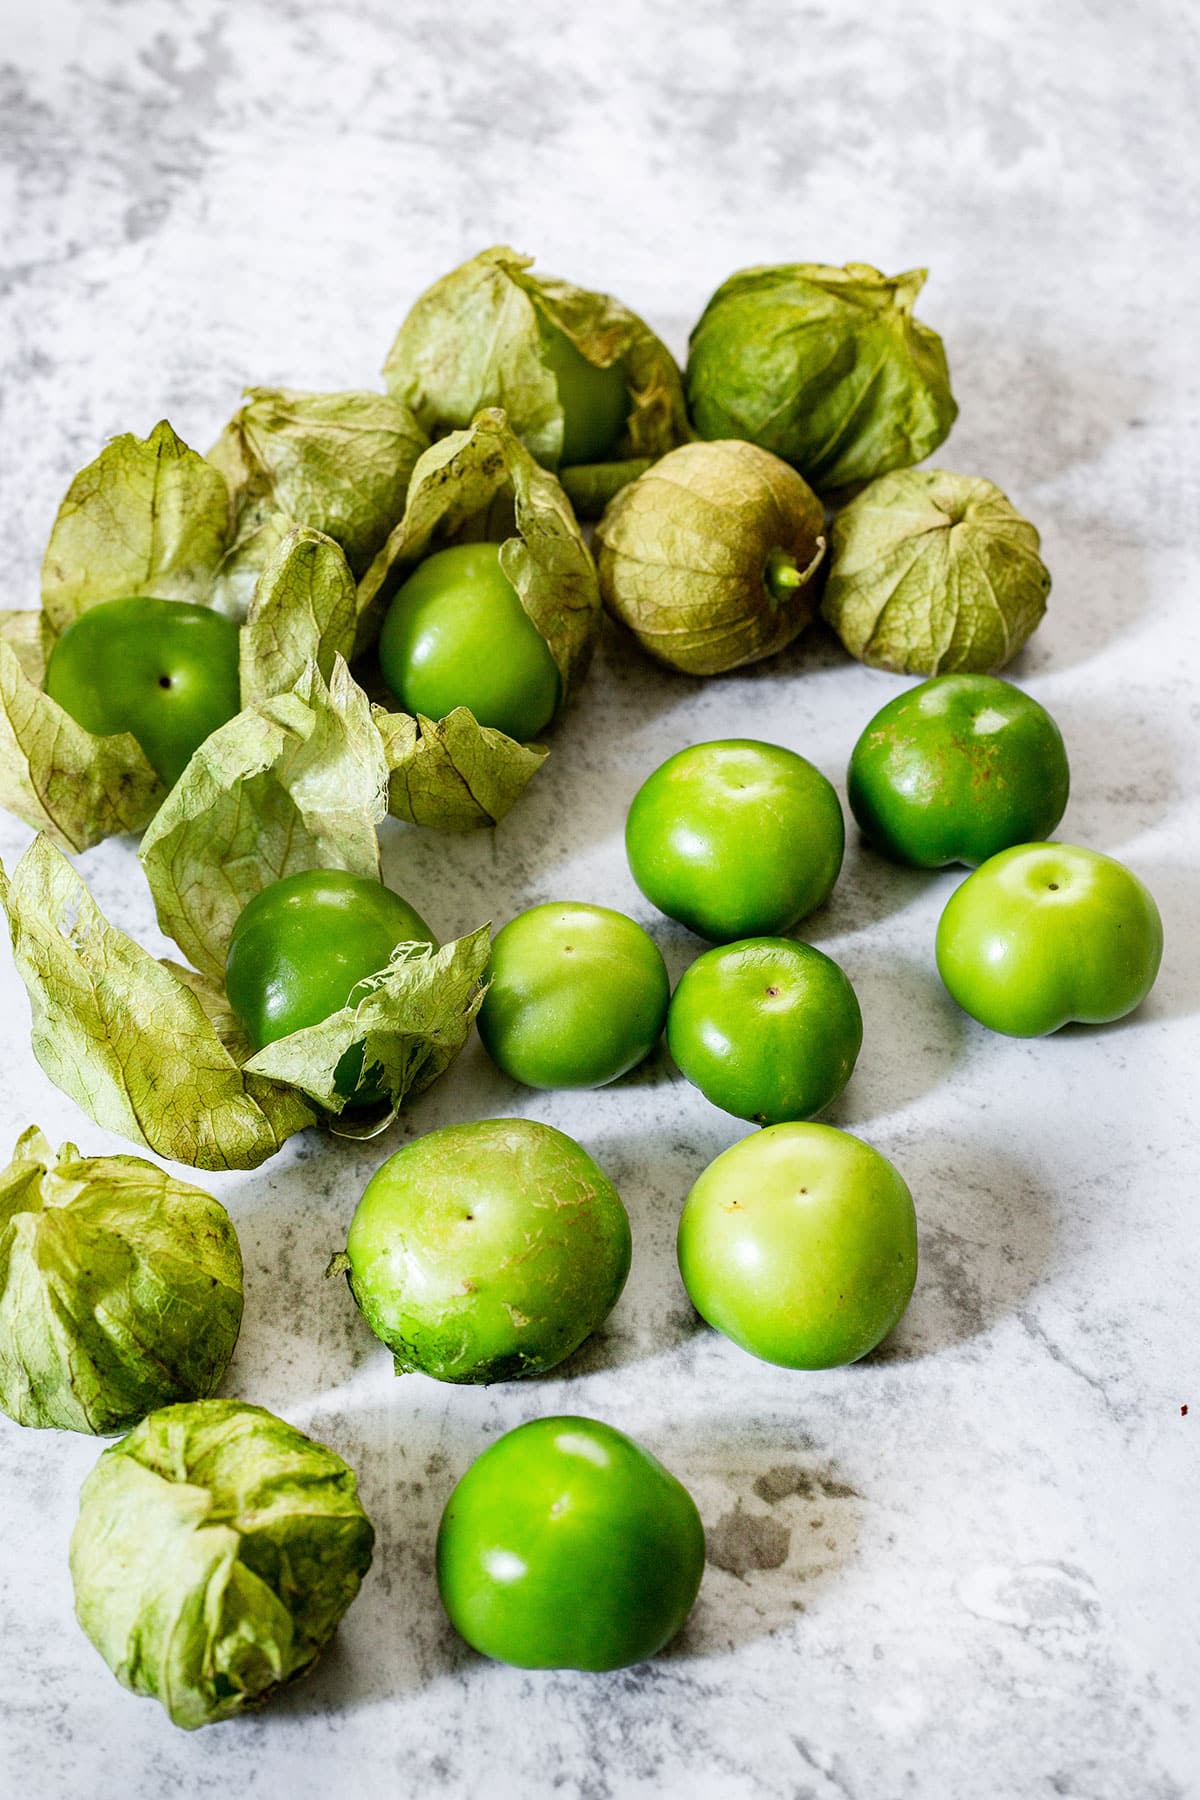 Fresh tomatillos scattered on a concrete surface.